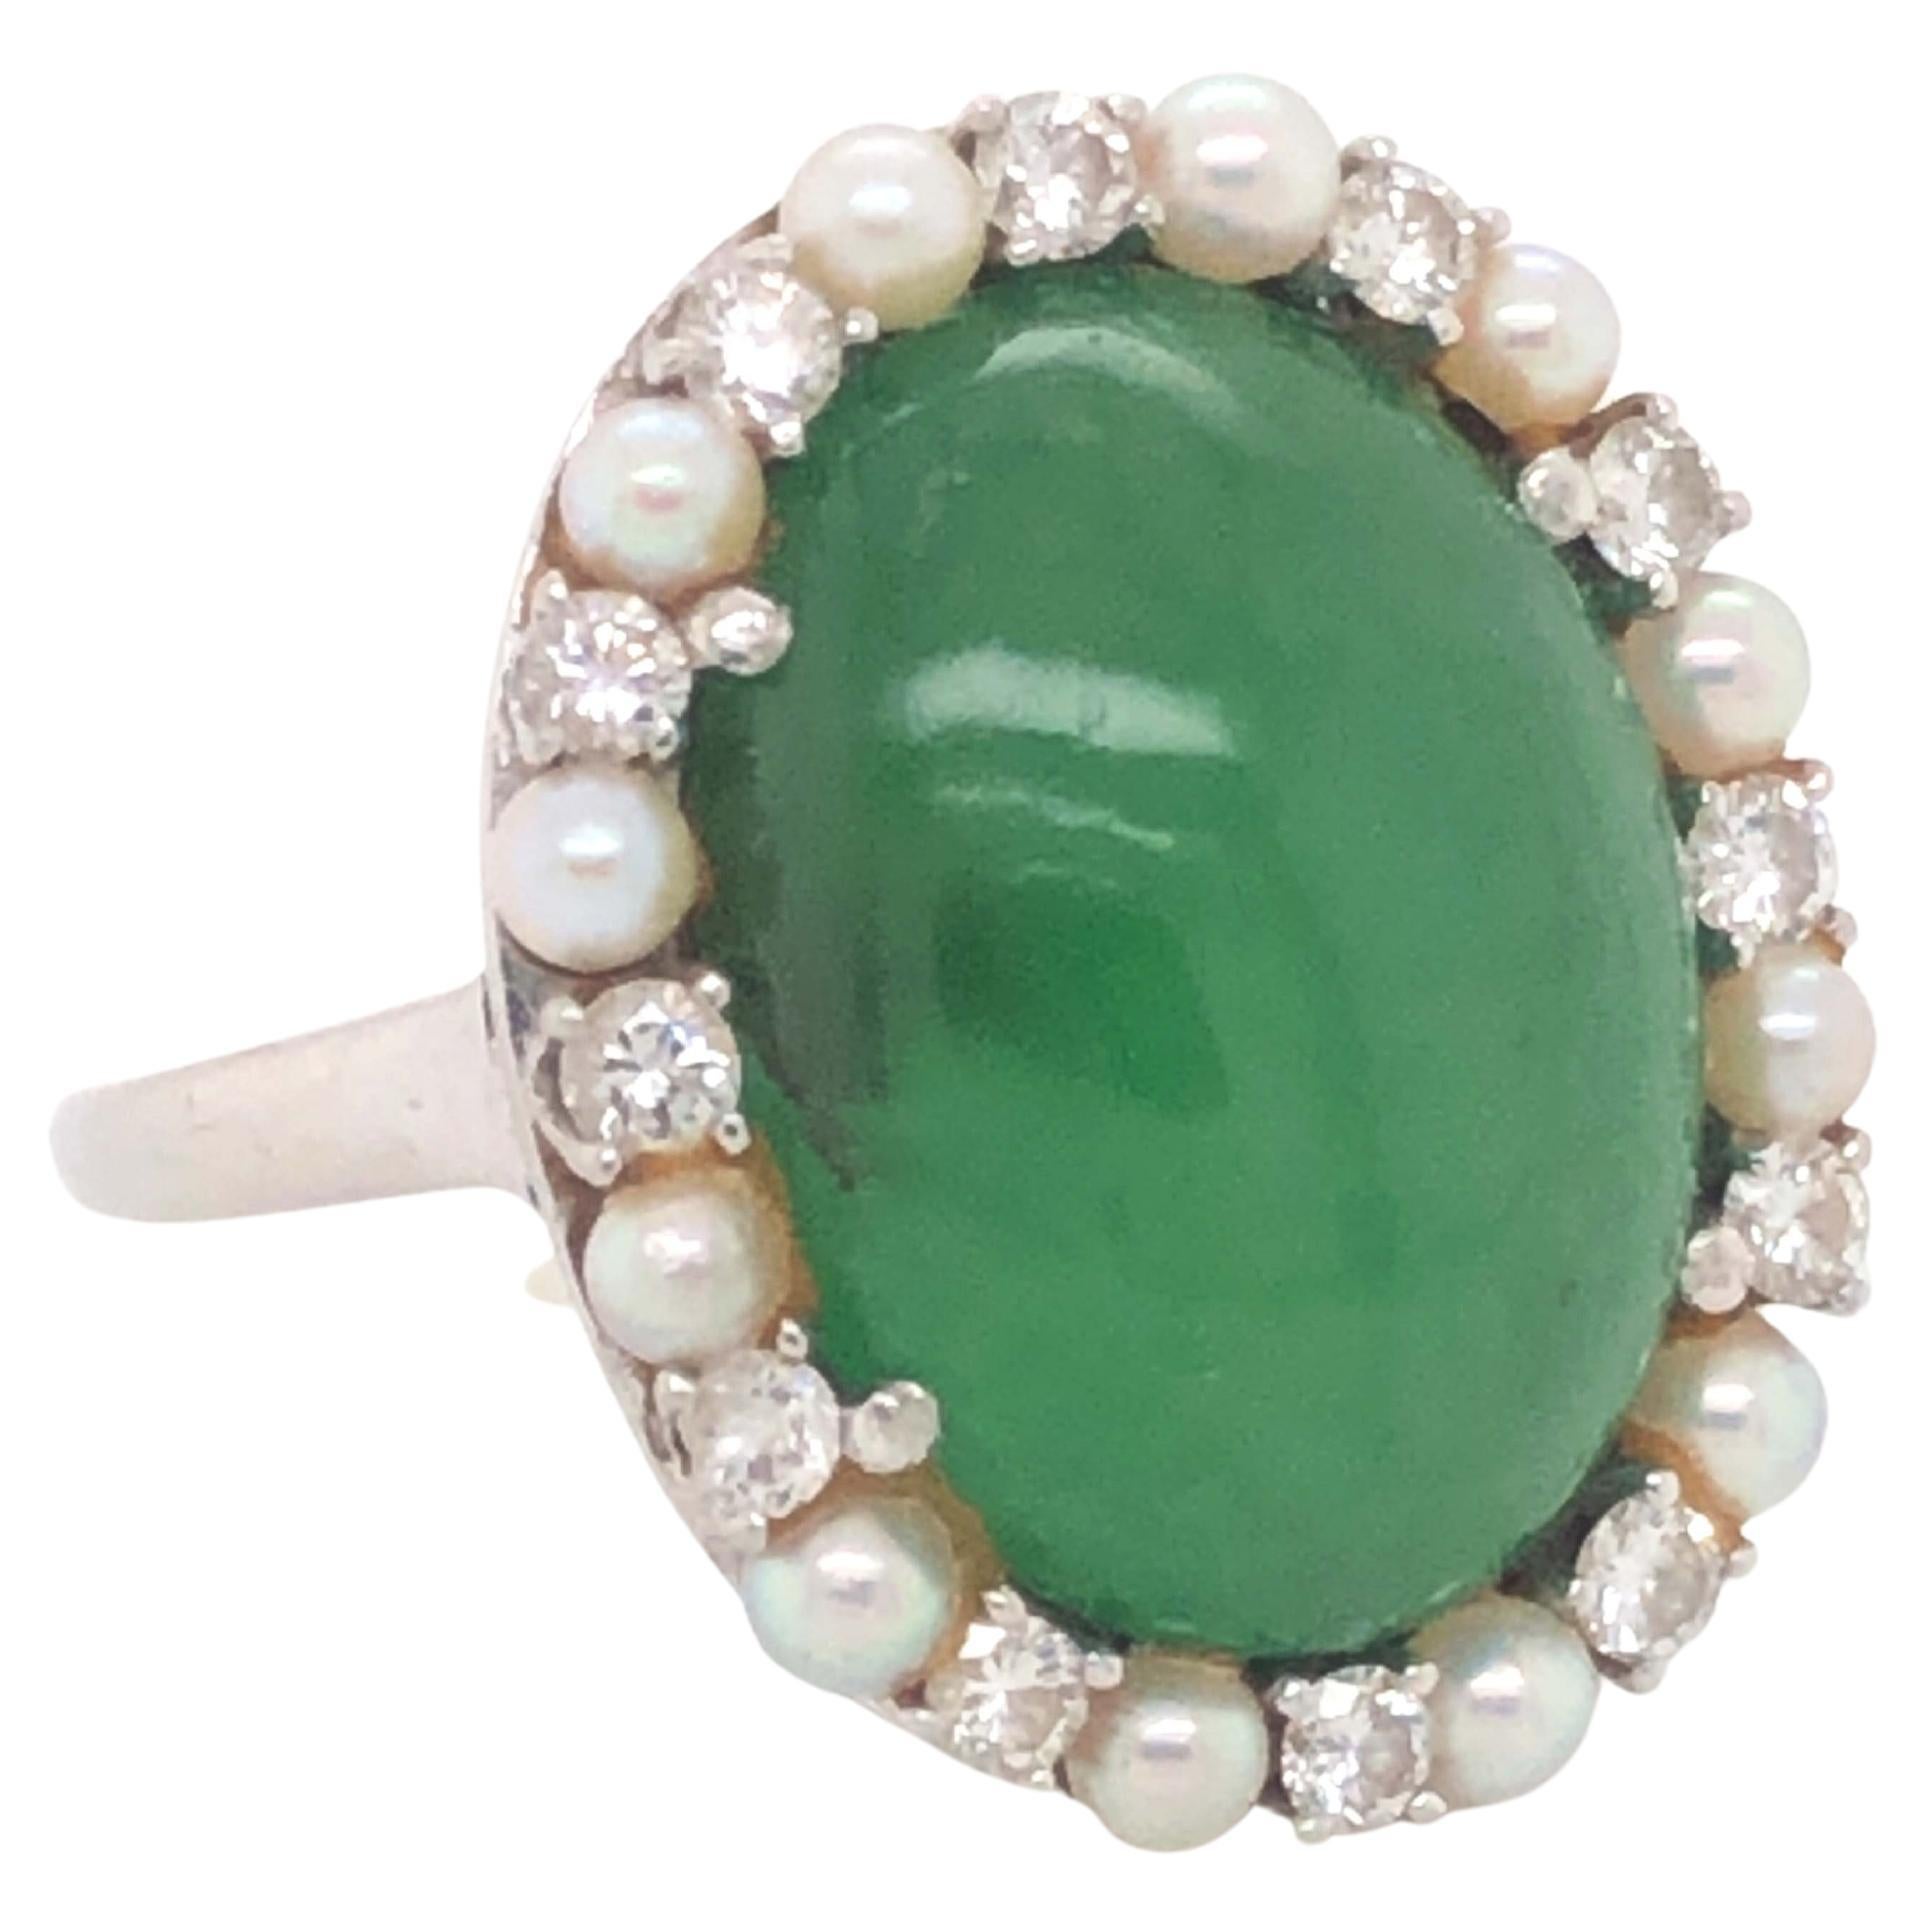 Vintage Oval Double Cabochon Green Jadeite Jade Pearl and Diamond Halo Ring in Platinum. Oval shape double cabochon green jadeite jade with a pearl and diamond halo. Comes with GIA report #:5234035329. Order will include original GIA report. The